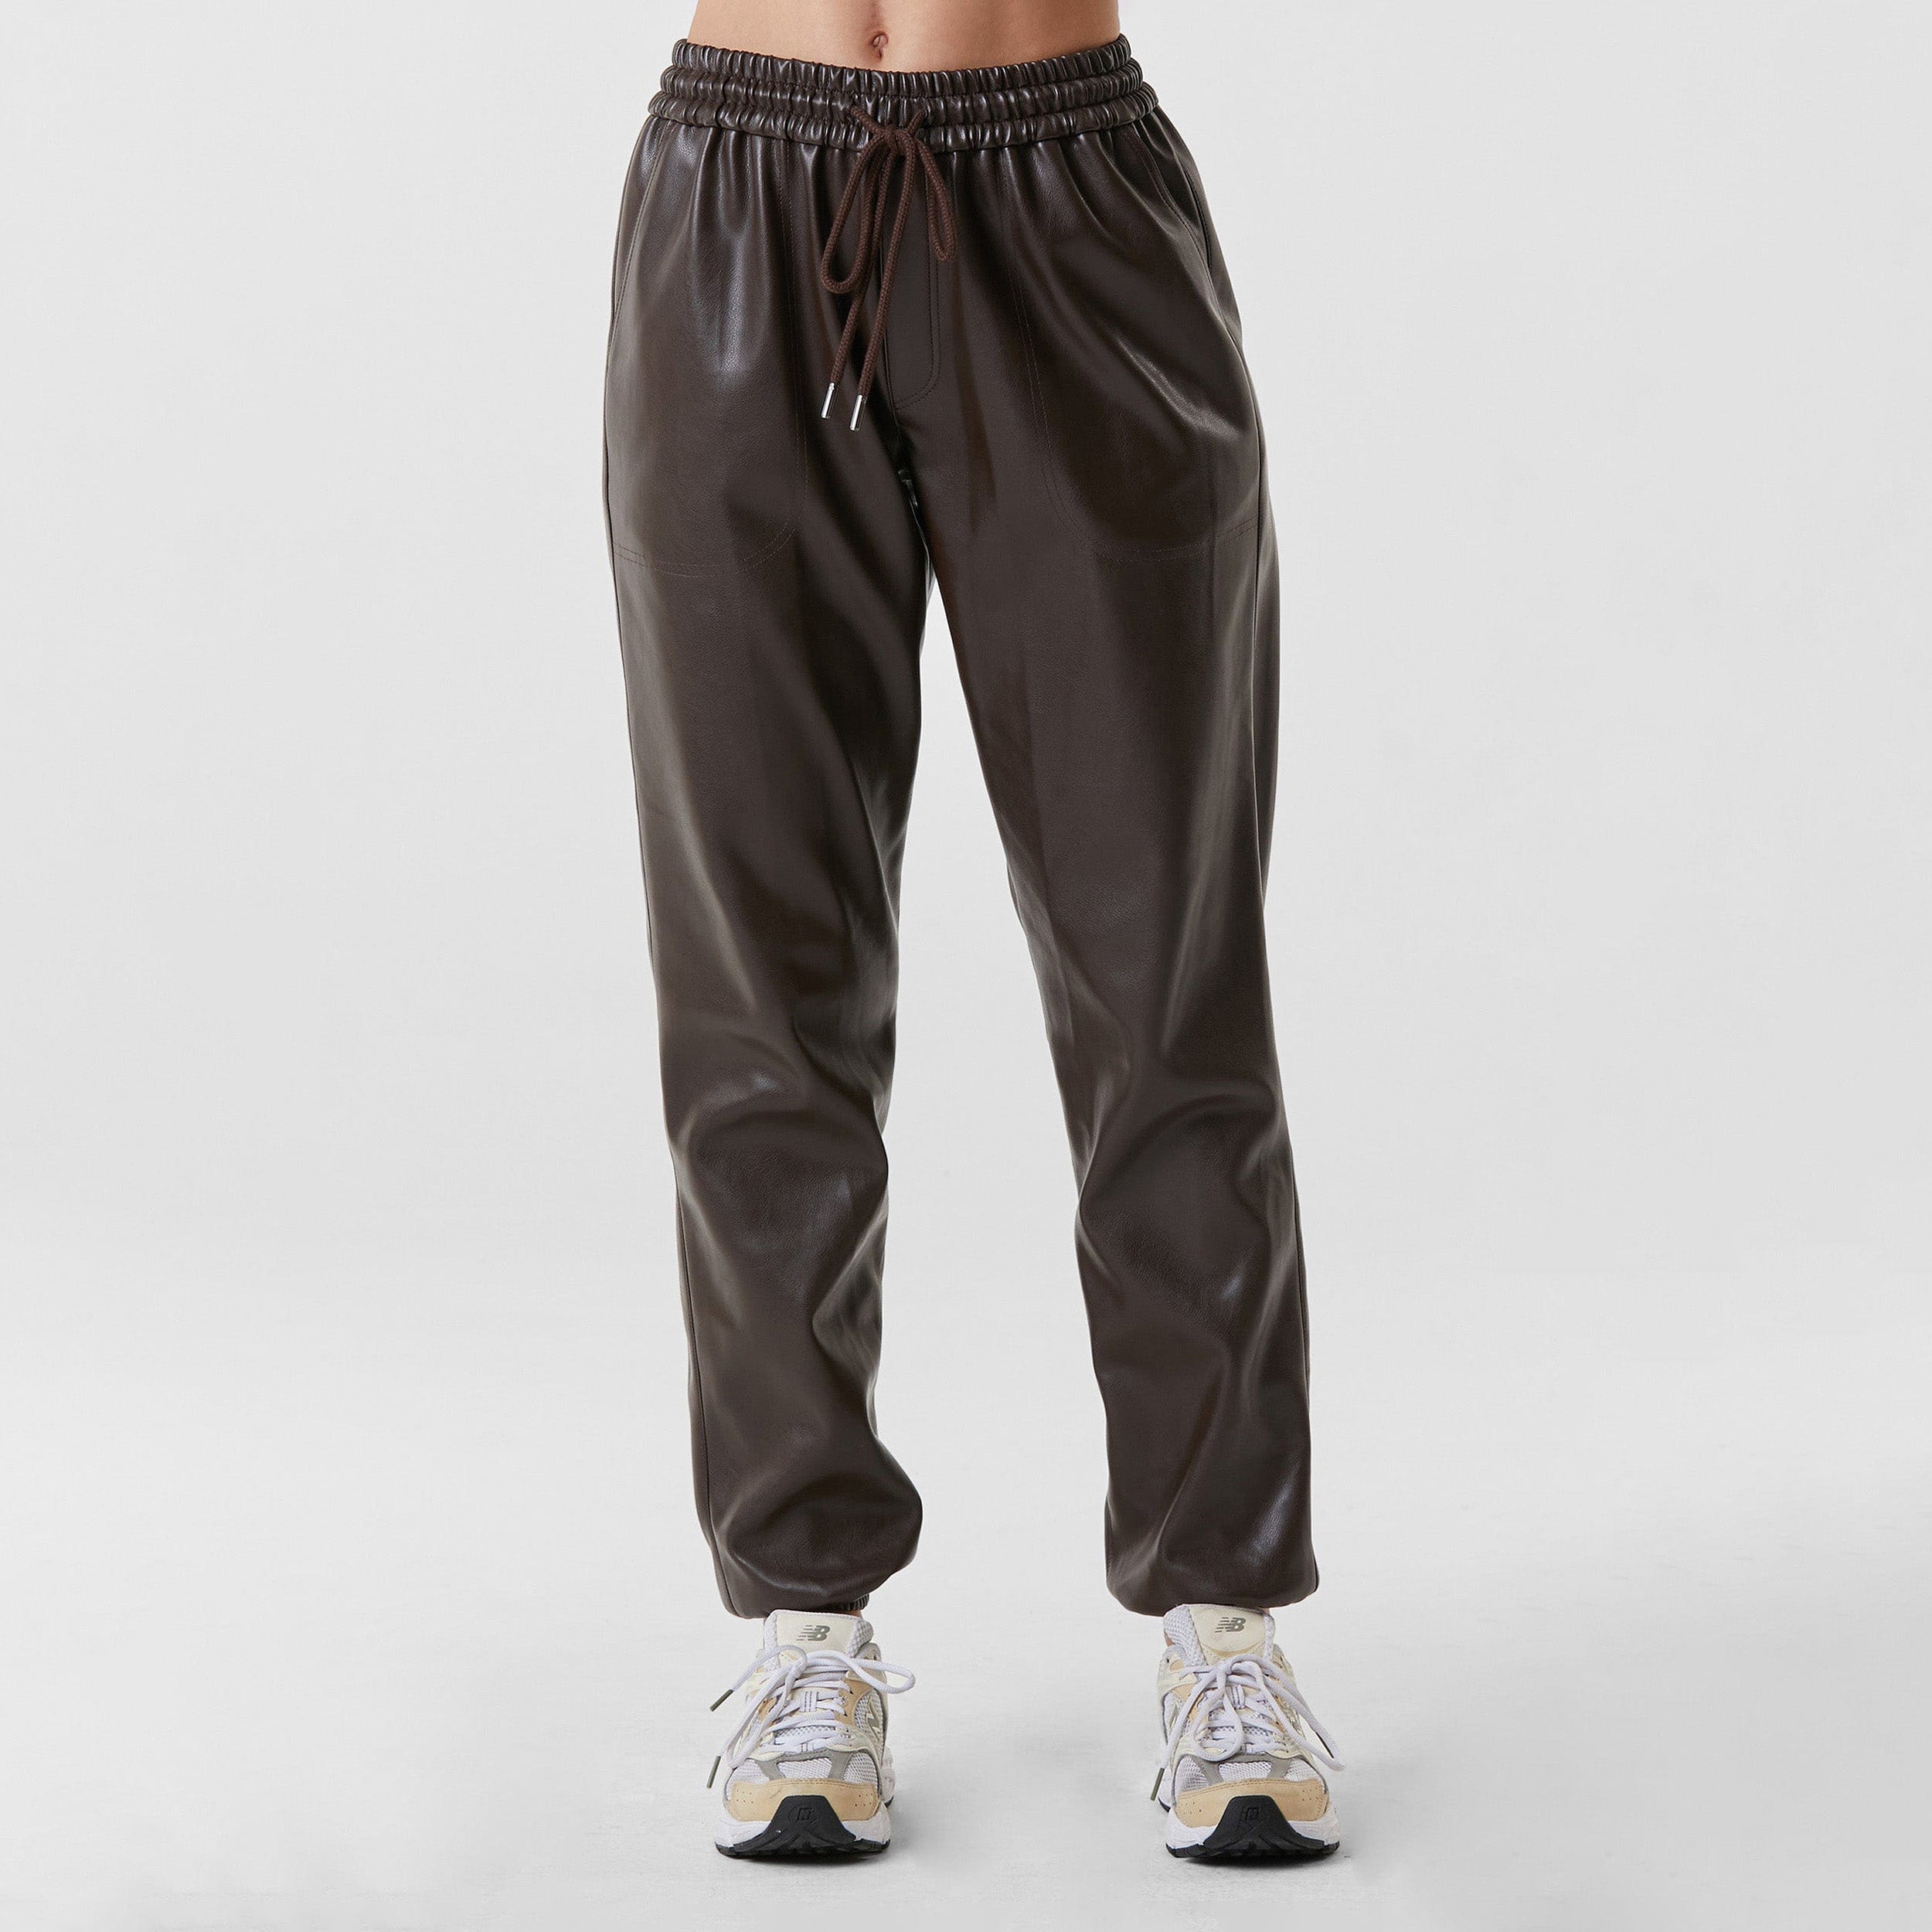 Front view of woman wearing dark brown high rise faux leather jogger with drawstring waistband and cinched ankles with suede lining.